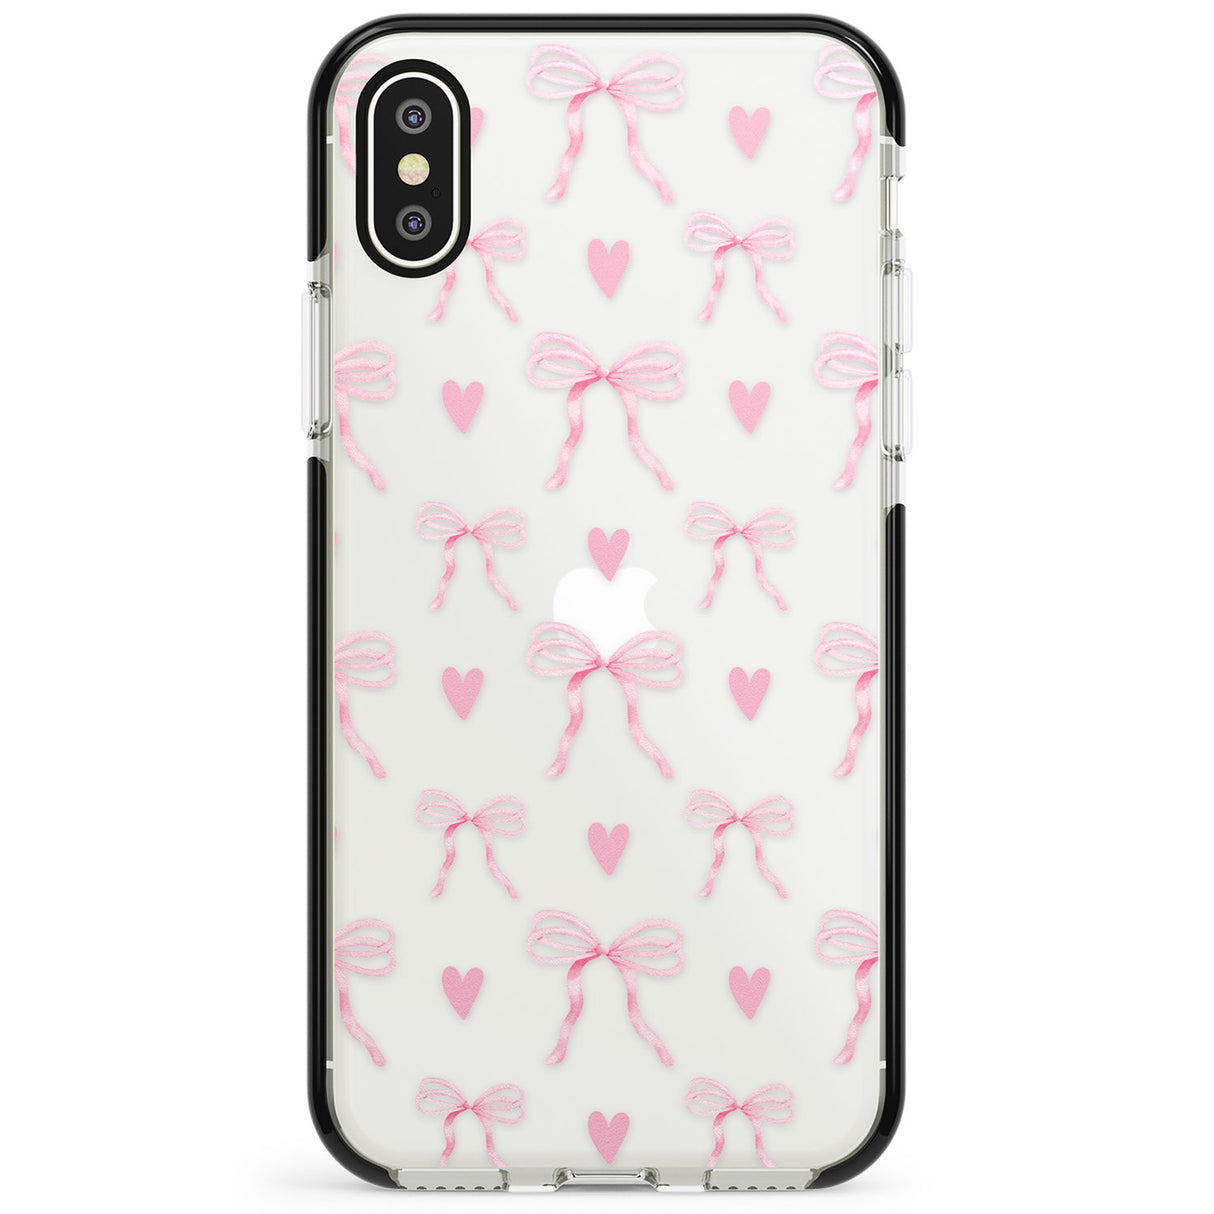 Pink Bows & Hearts Phone Case for iPhone X XS Max XR